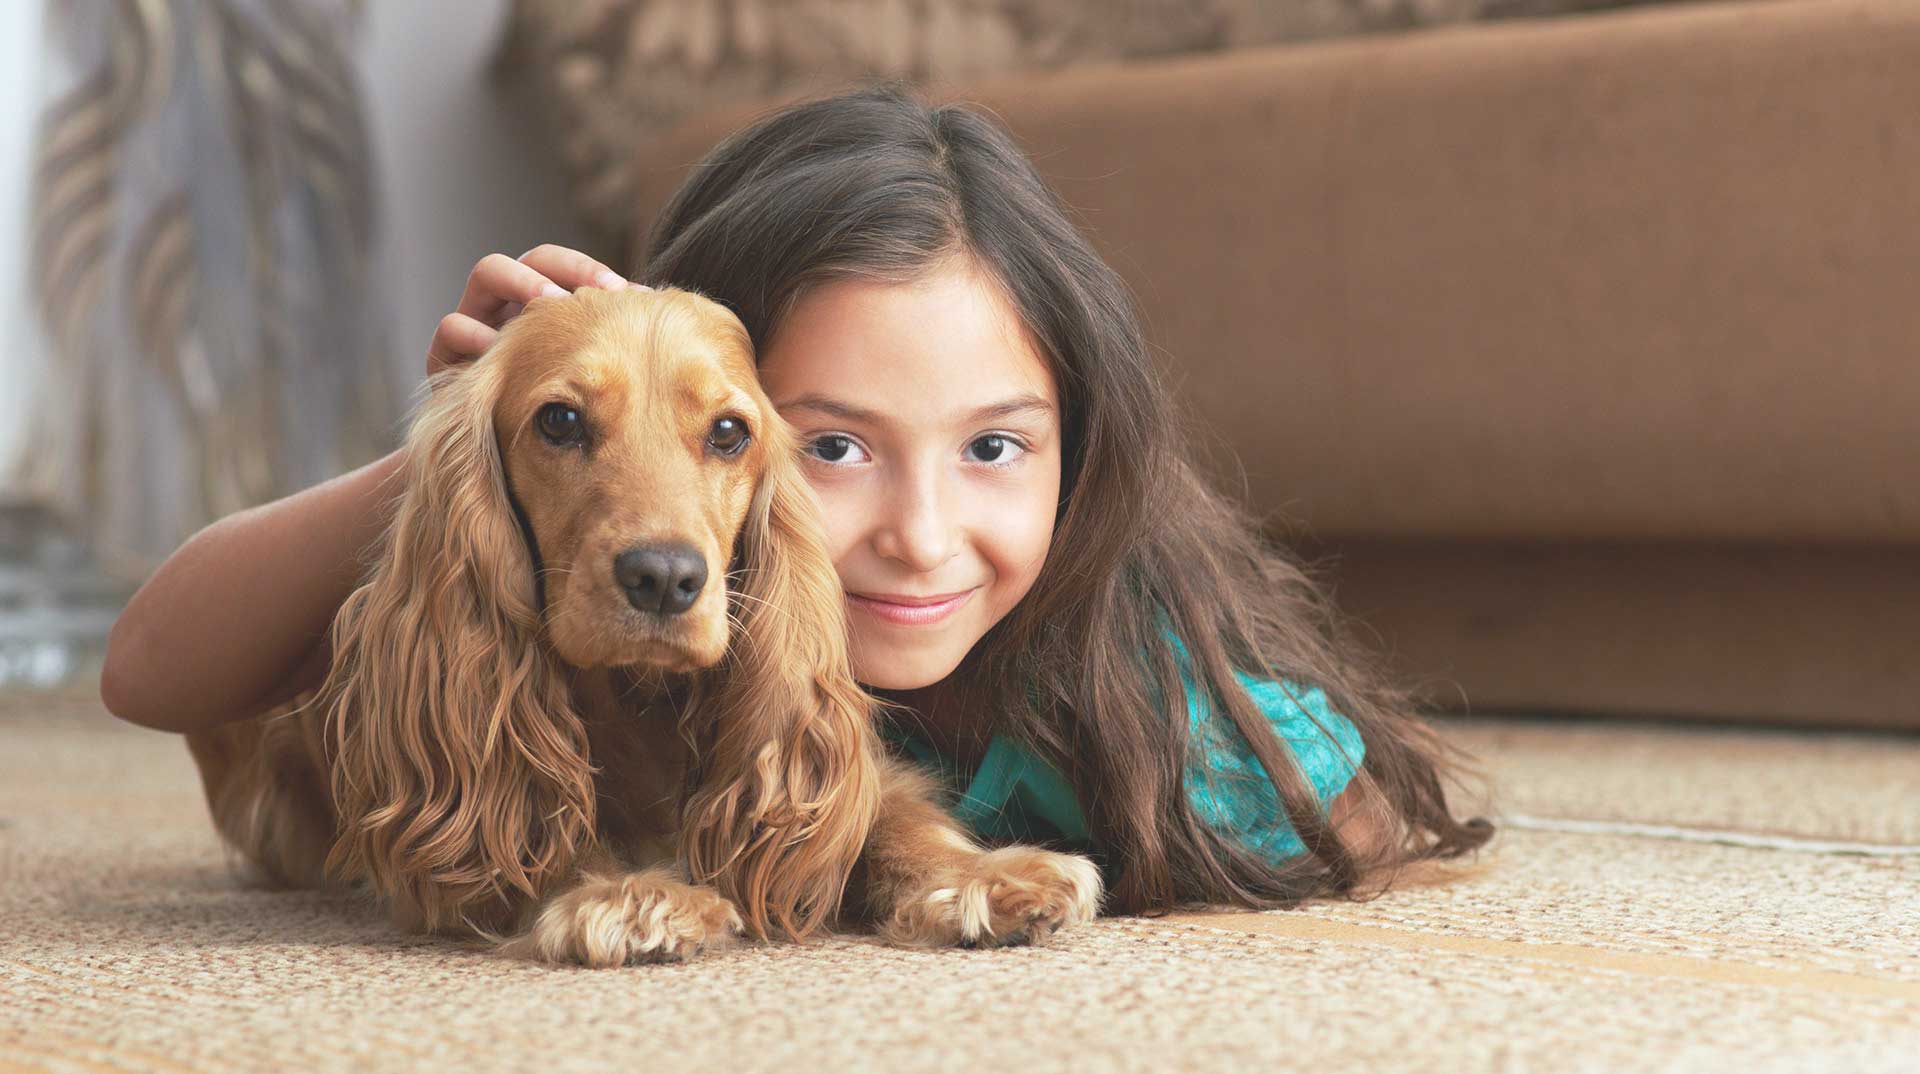 Girl with dog on carpet